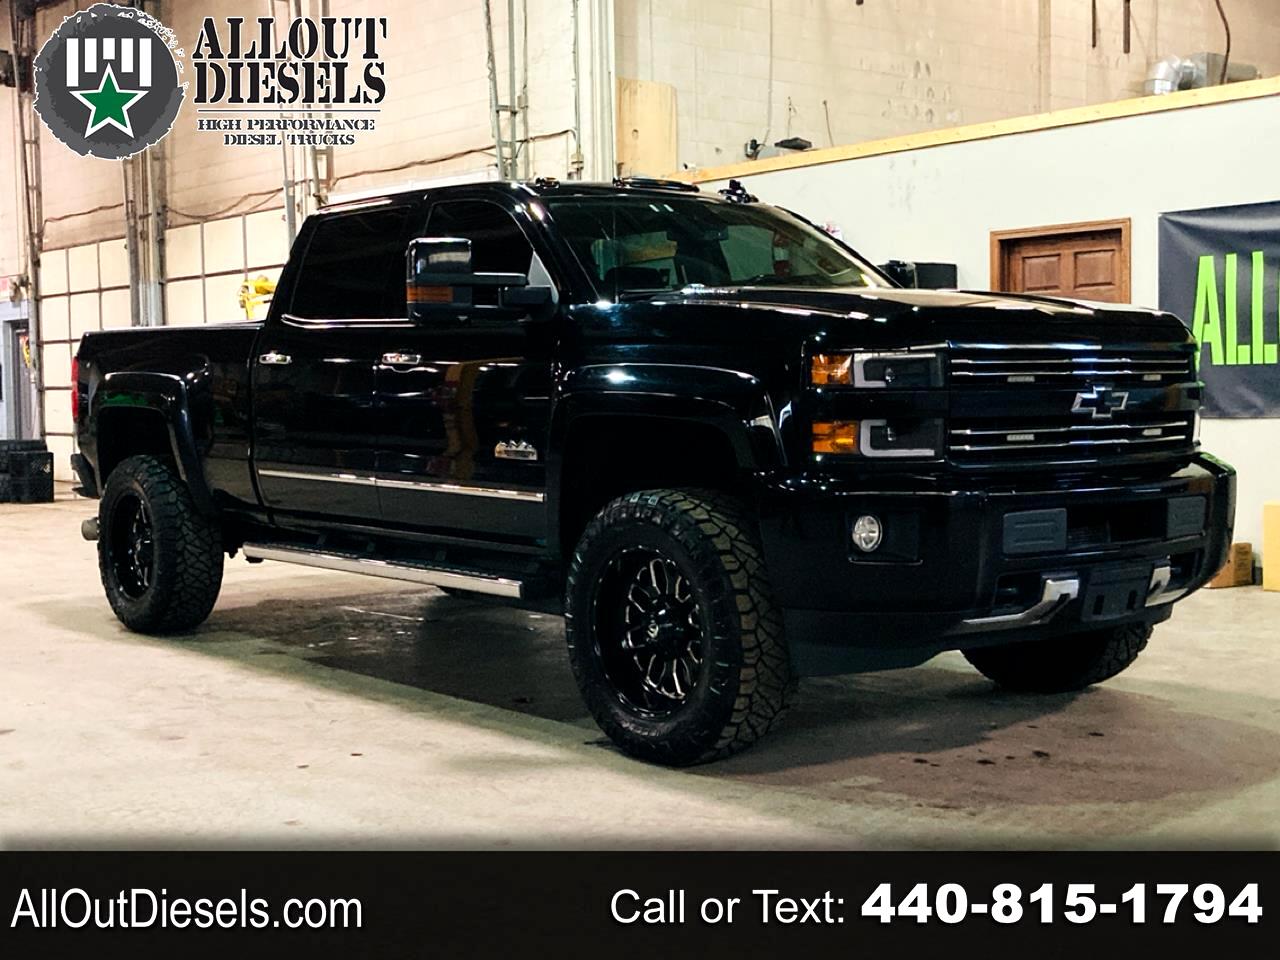 Chevrolet Silverado 2500HD Built After Aug 14 4WD Crew Cab 153.7" High Country 2015